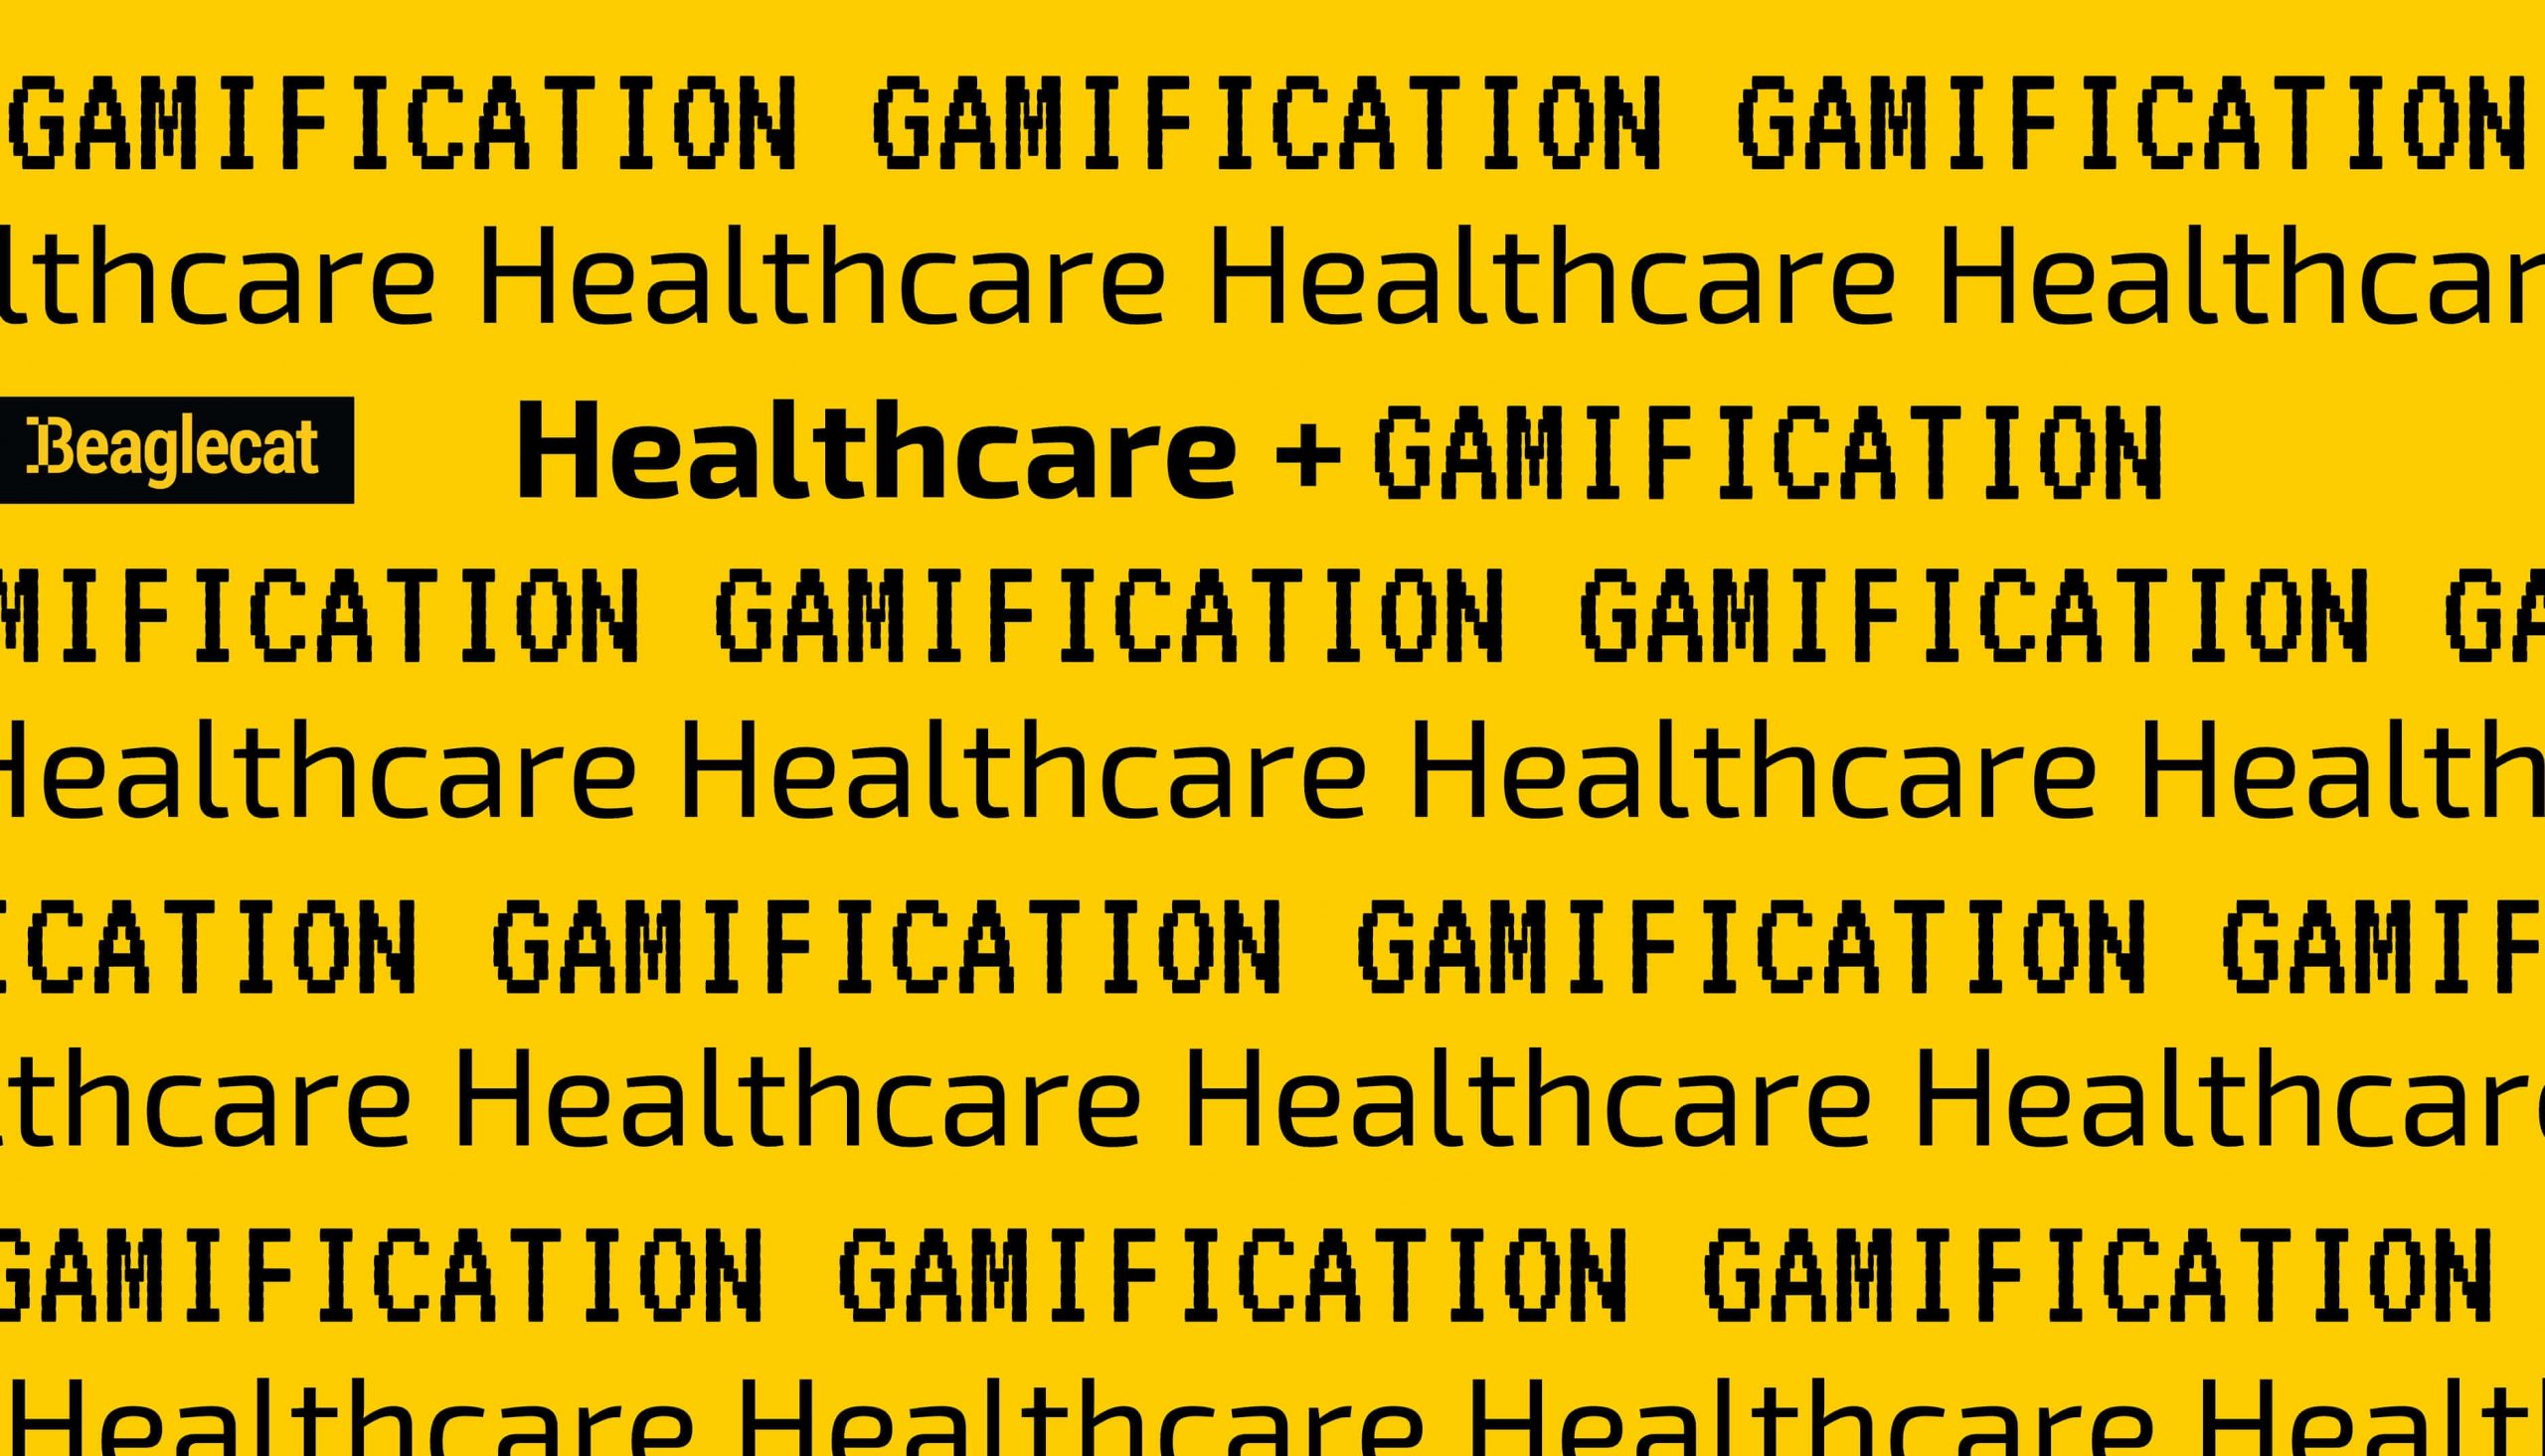 gamification_examples